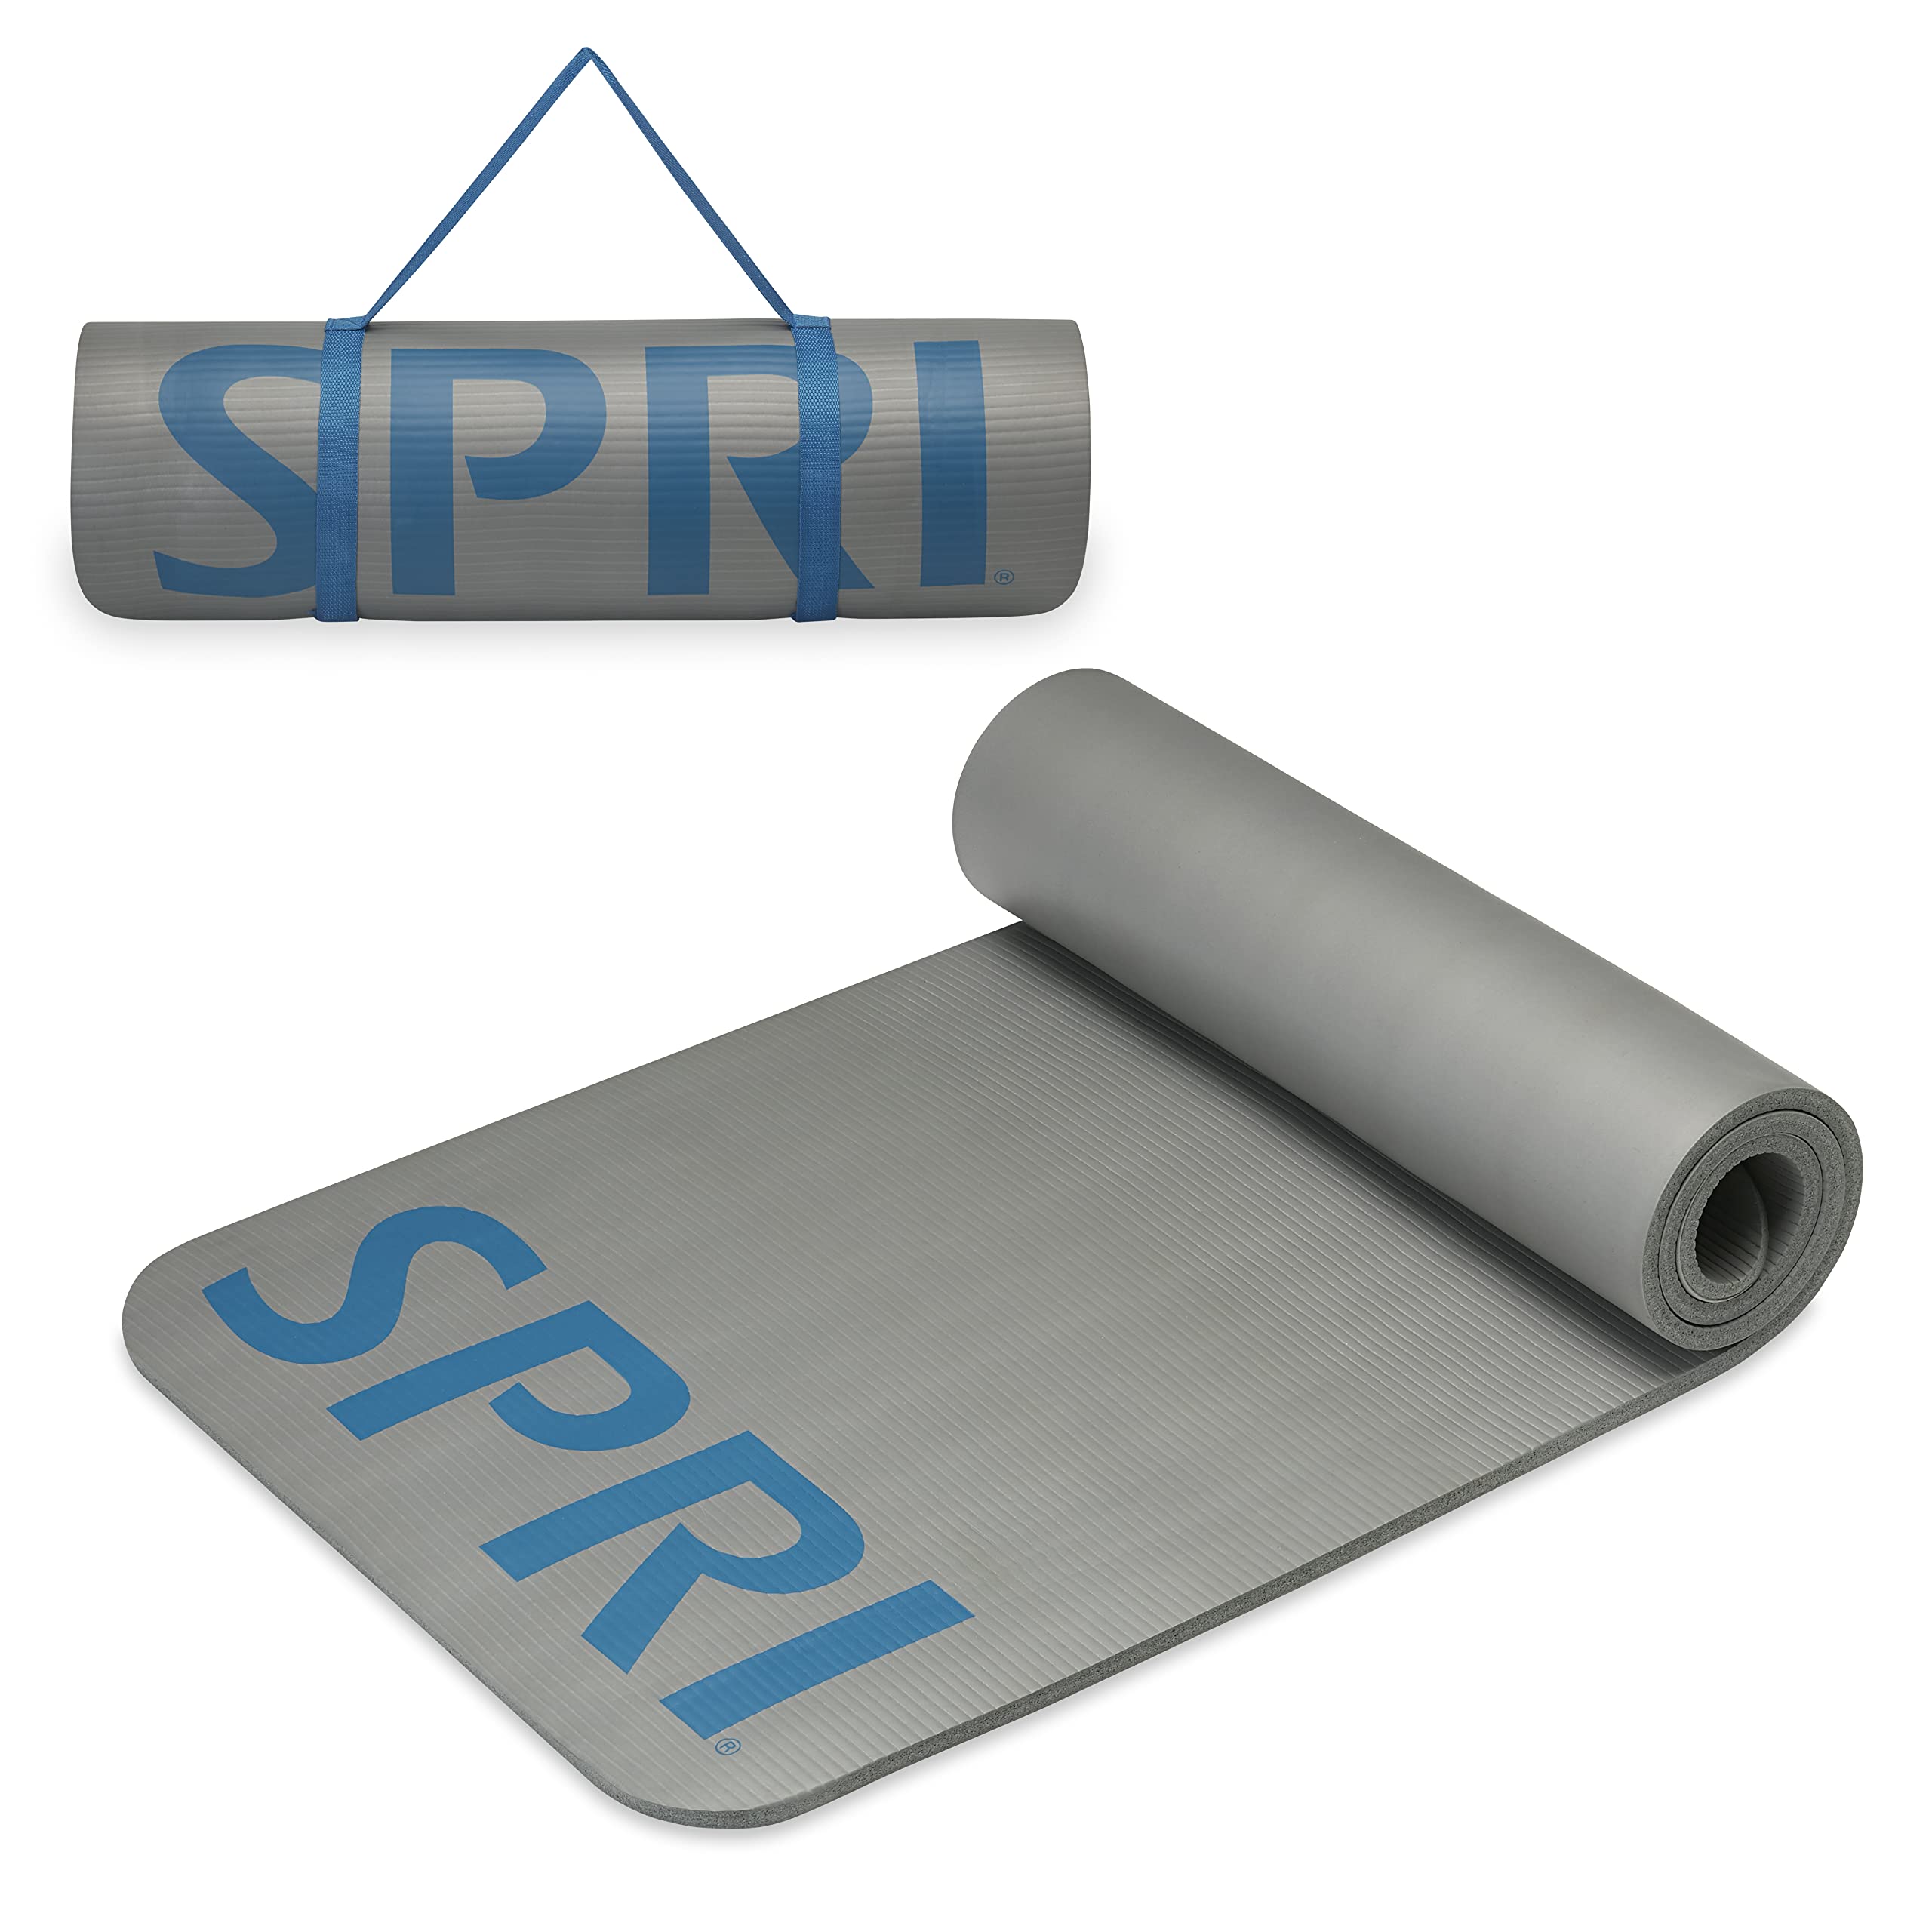 SPRI 12mm Pro Fitness Matt - Thick Exercise Mat for Floor Workouts, Sit-Ups, Push-Ups, Stretching, Toning, and General Fitness - Non-Slip Texture, Cushioned, Portable Rolling Mat with Carrying Strap Grey